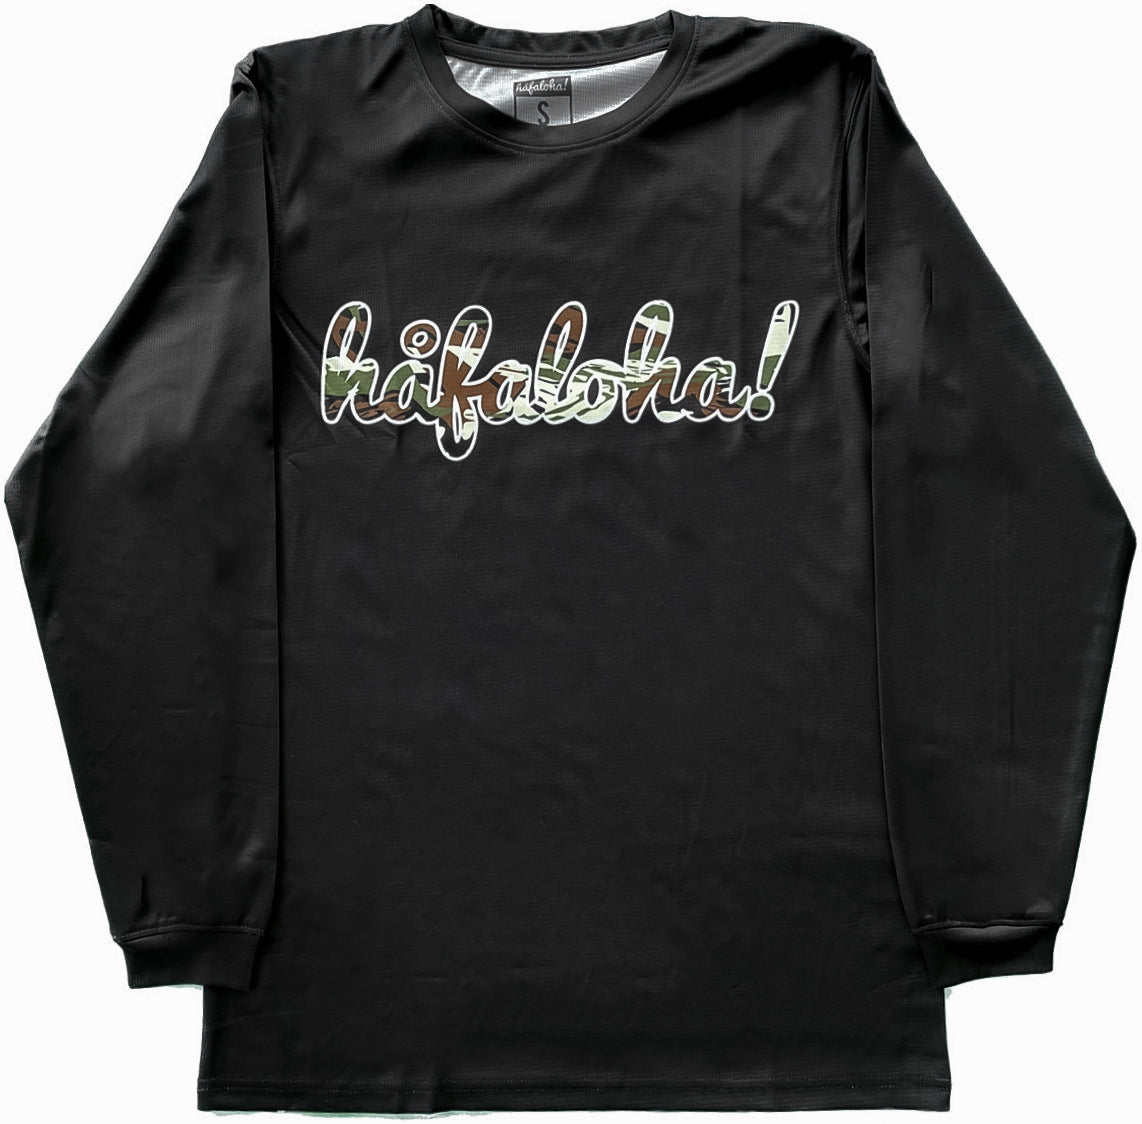 "Incognito" Design, Long Sleeve, Black, Front